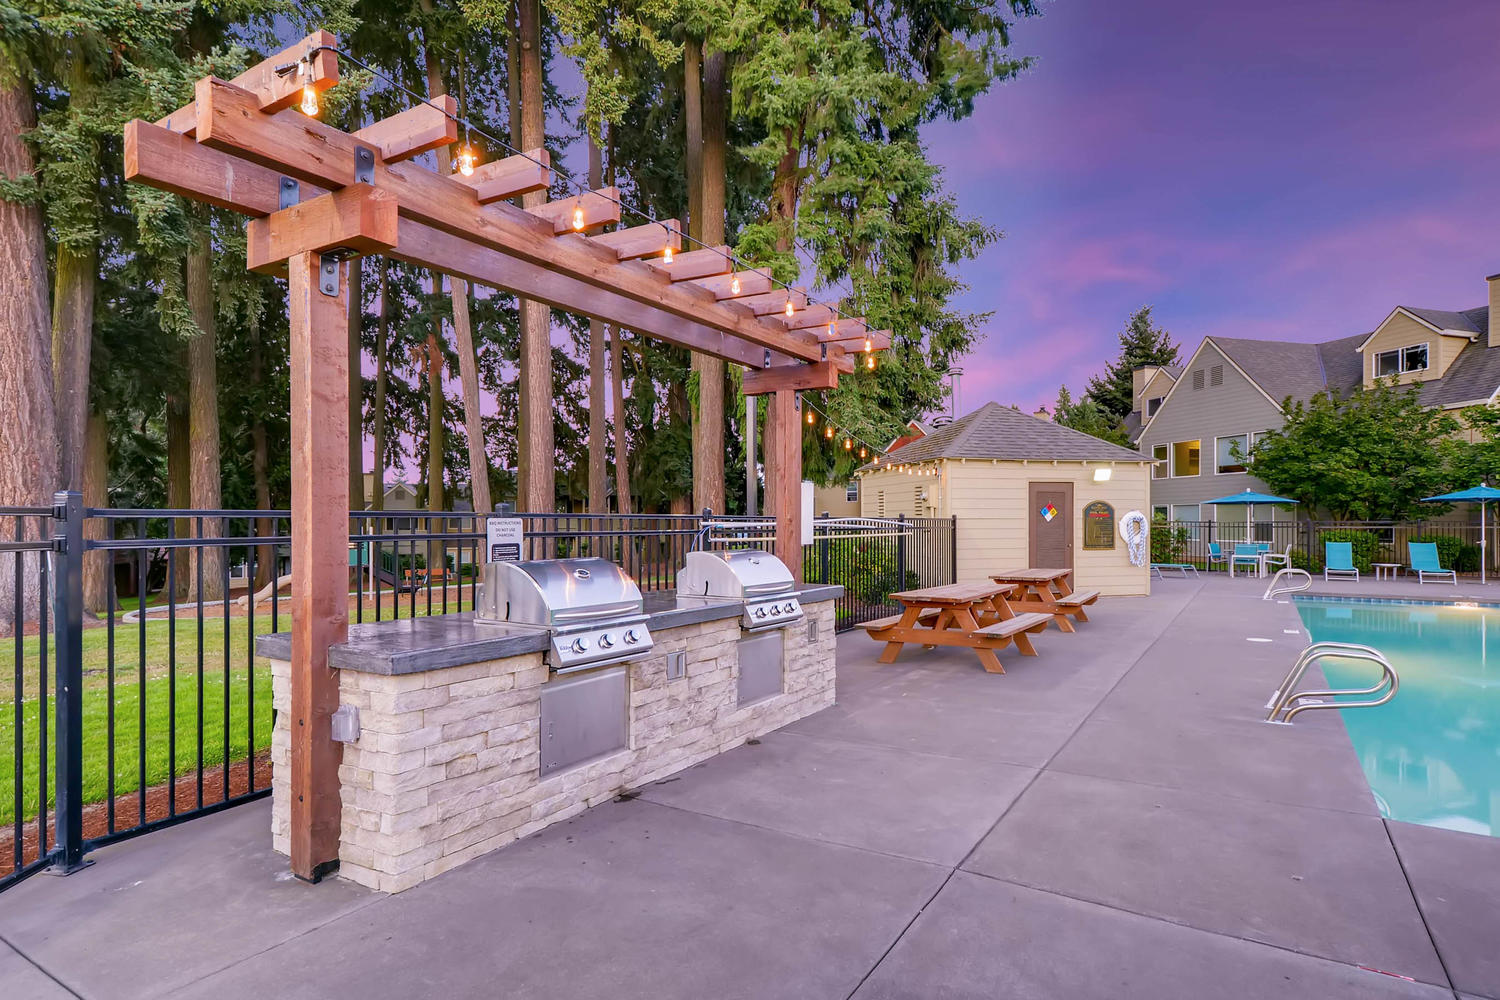 Poolside outdoor grill and surrounding buildings